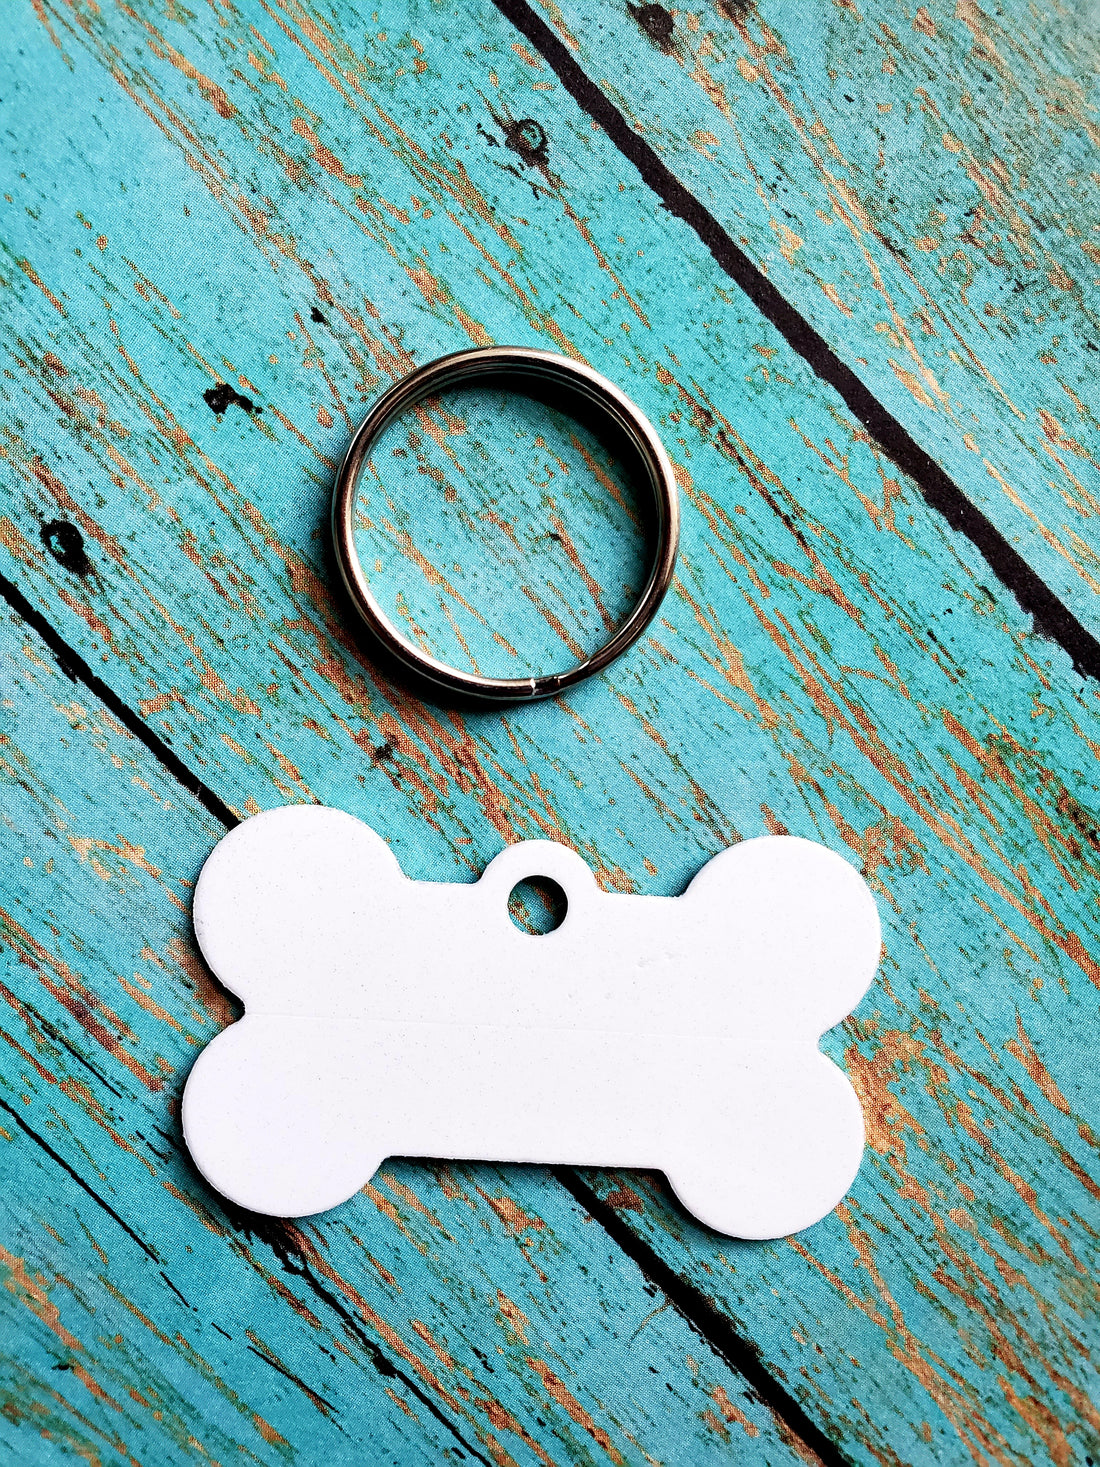 Personalize Dog Bone Sublimation Blank Pet Tags for Cash!